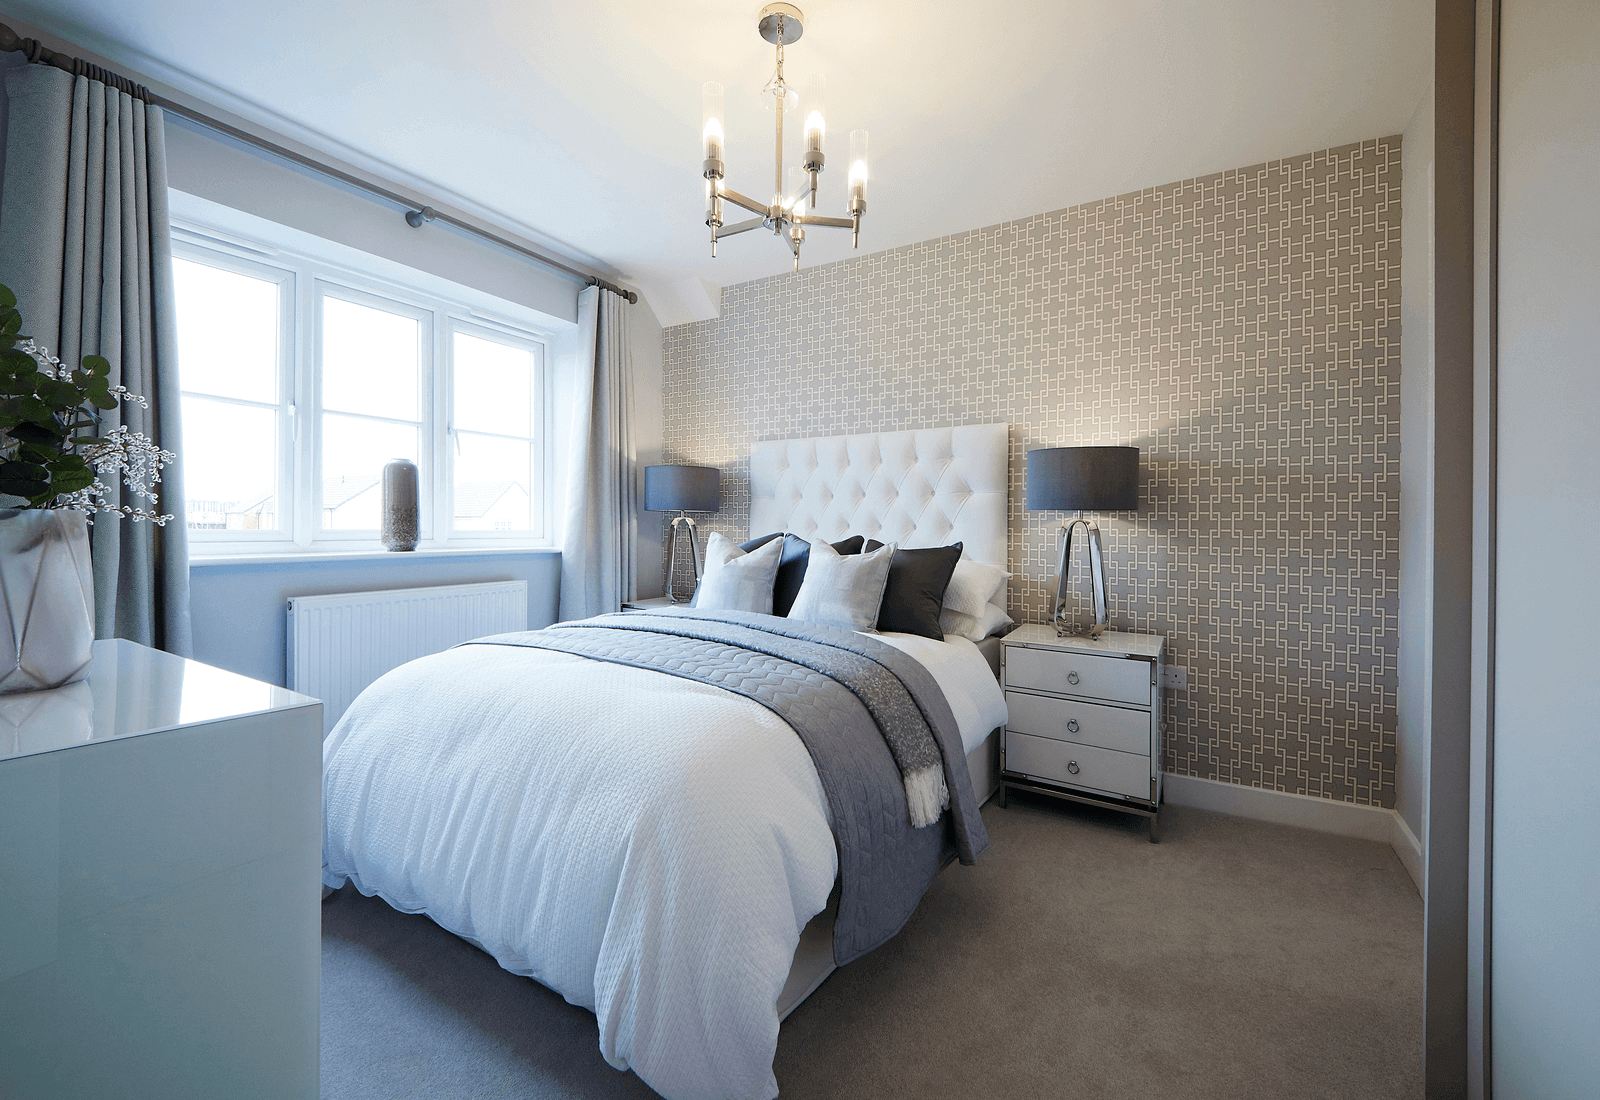 Bedroom 1 with en-suite in a Baycliffe Show Home